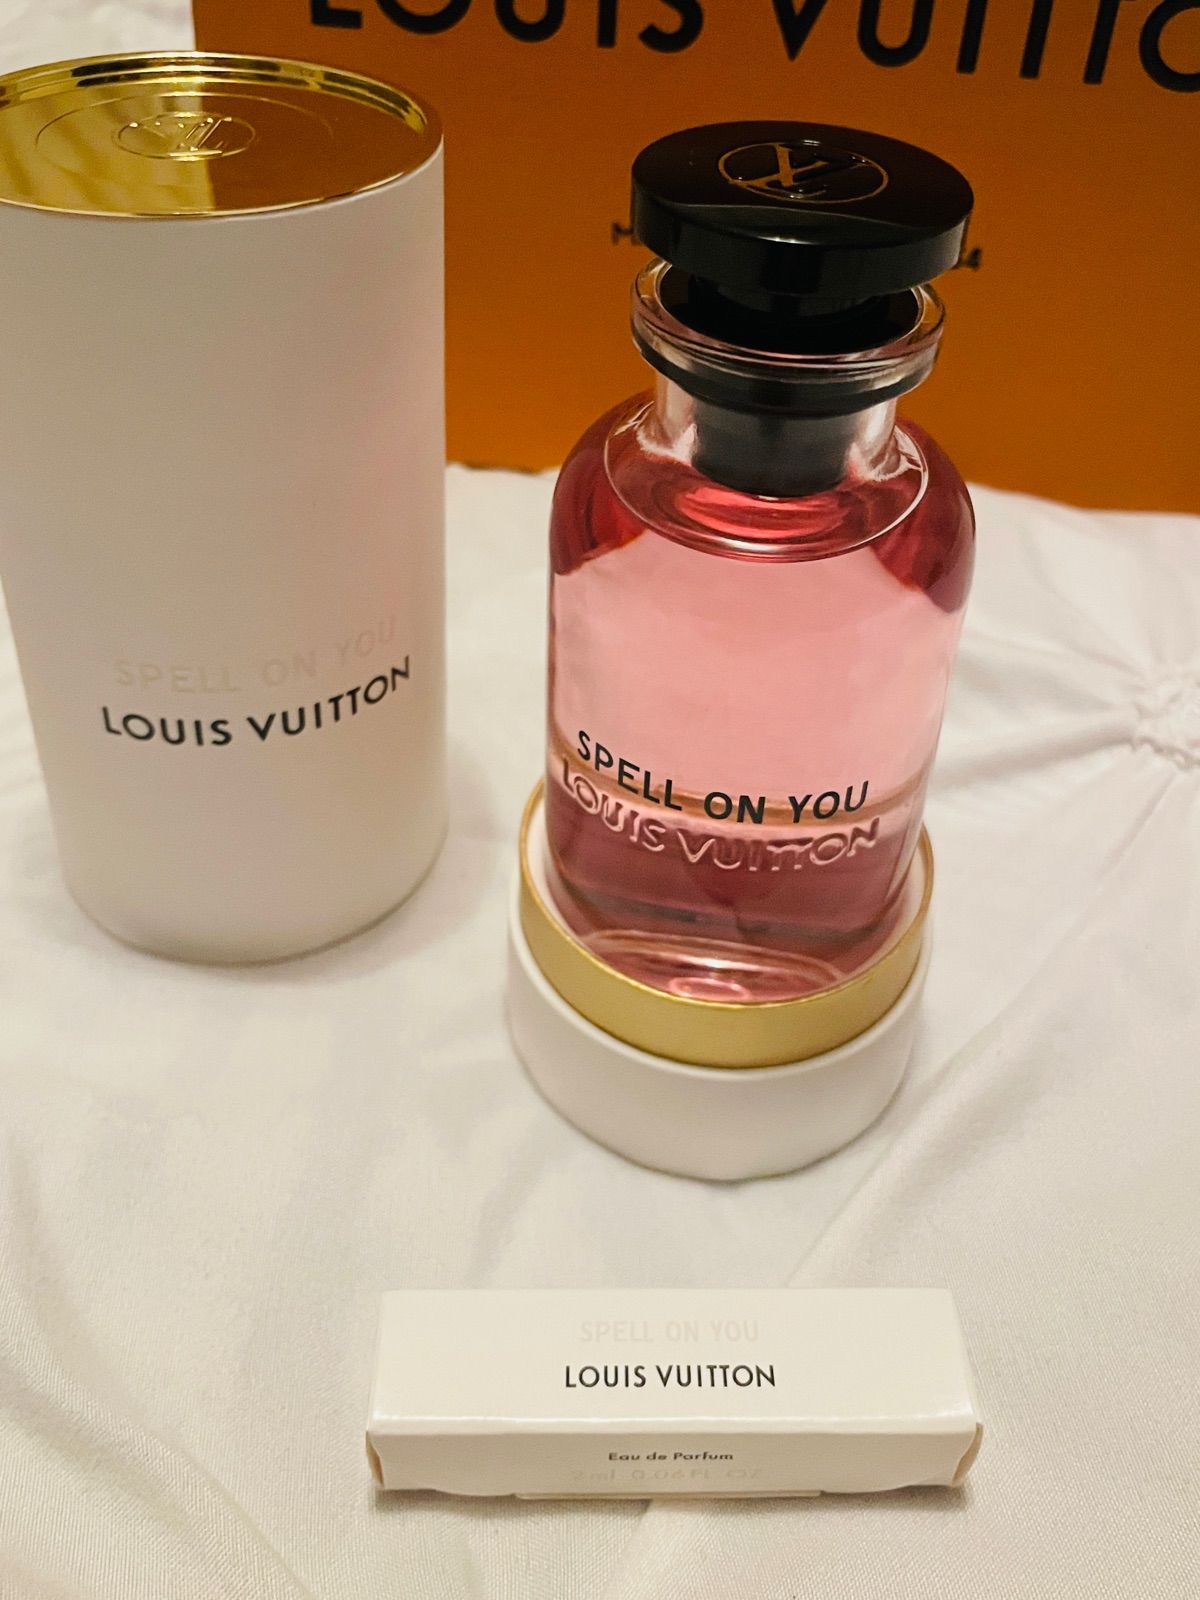 LOUIS VUITTON SPELL ON サンプル香水2ml YOU